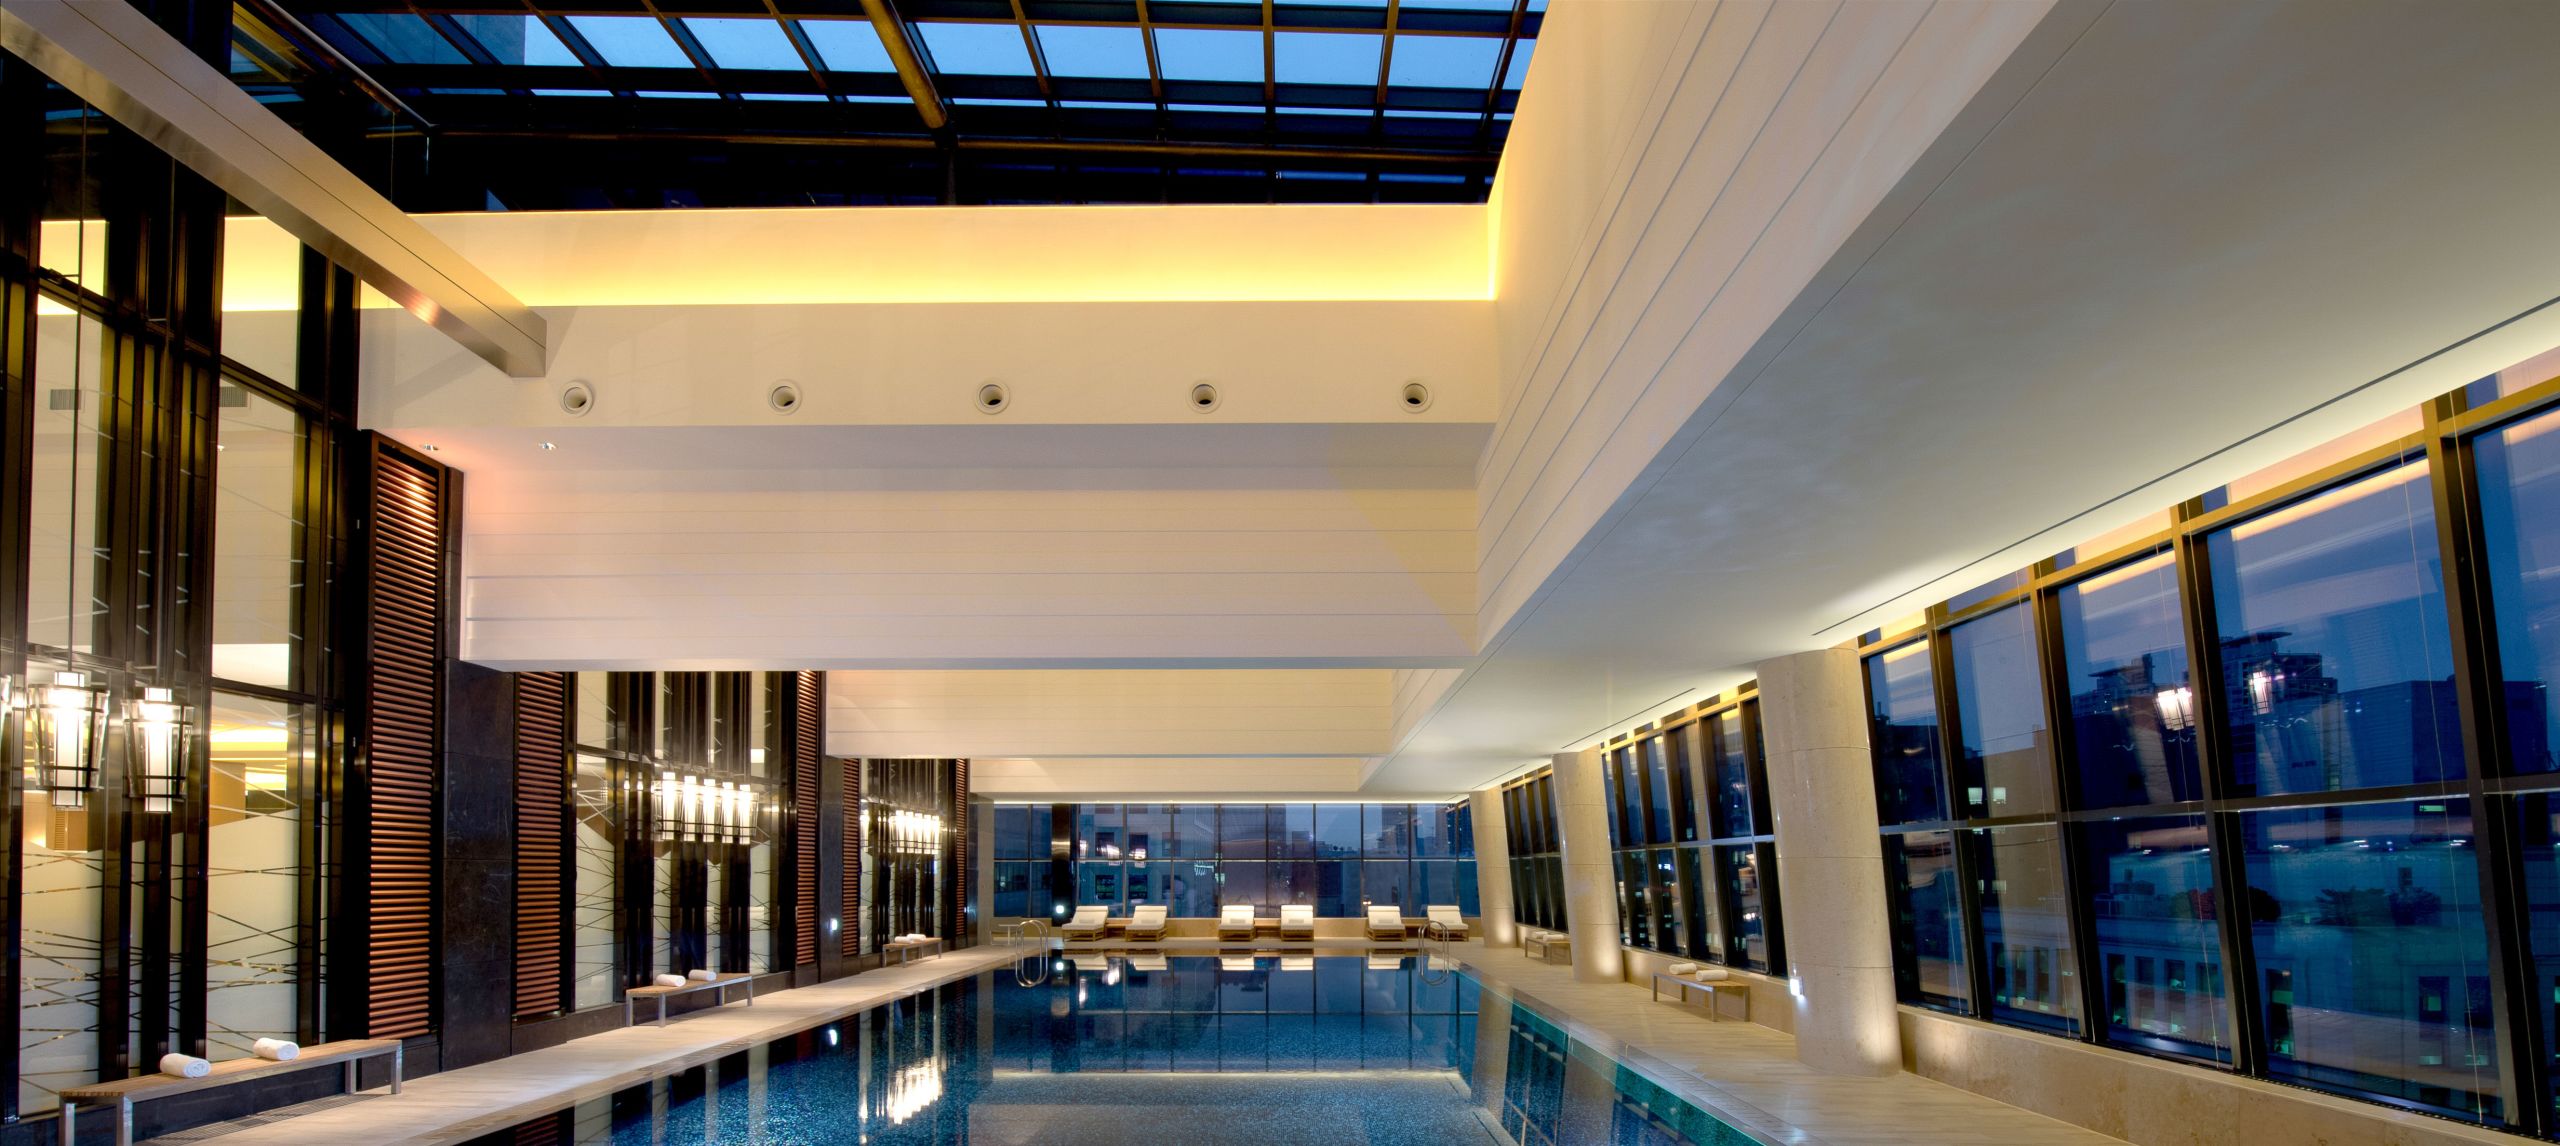 Pulse8 lap swimming pool, surrounded by floor to ceiling windows